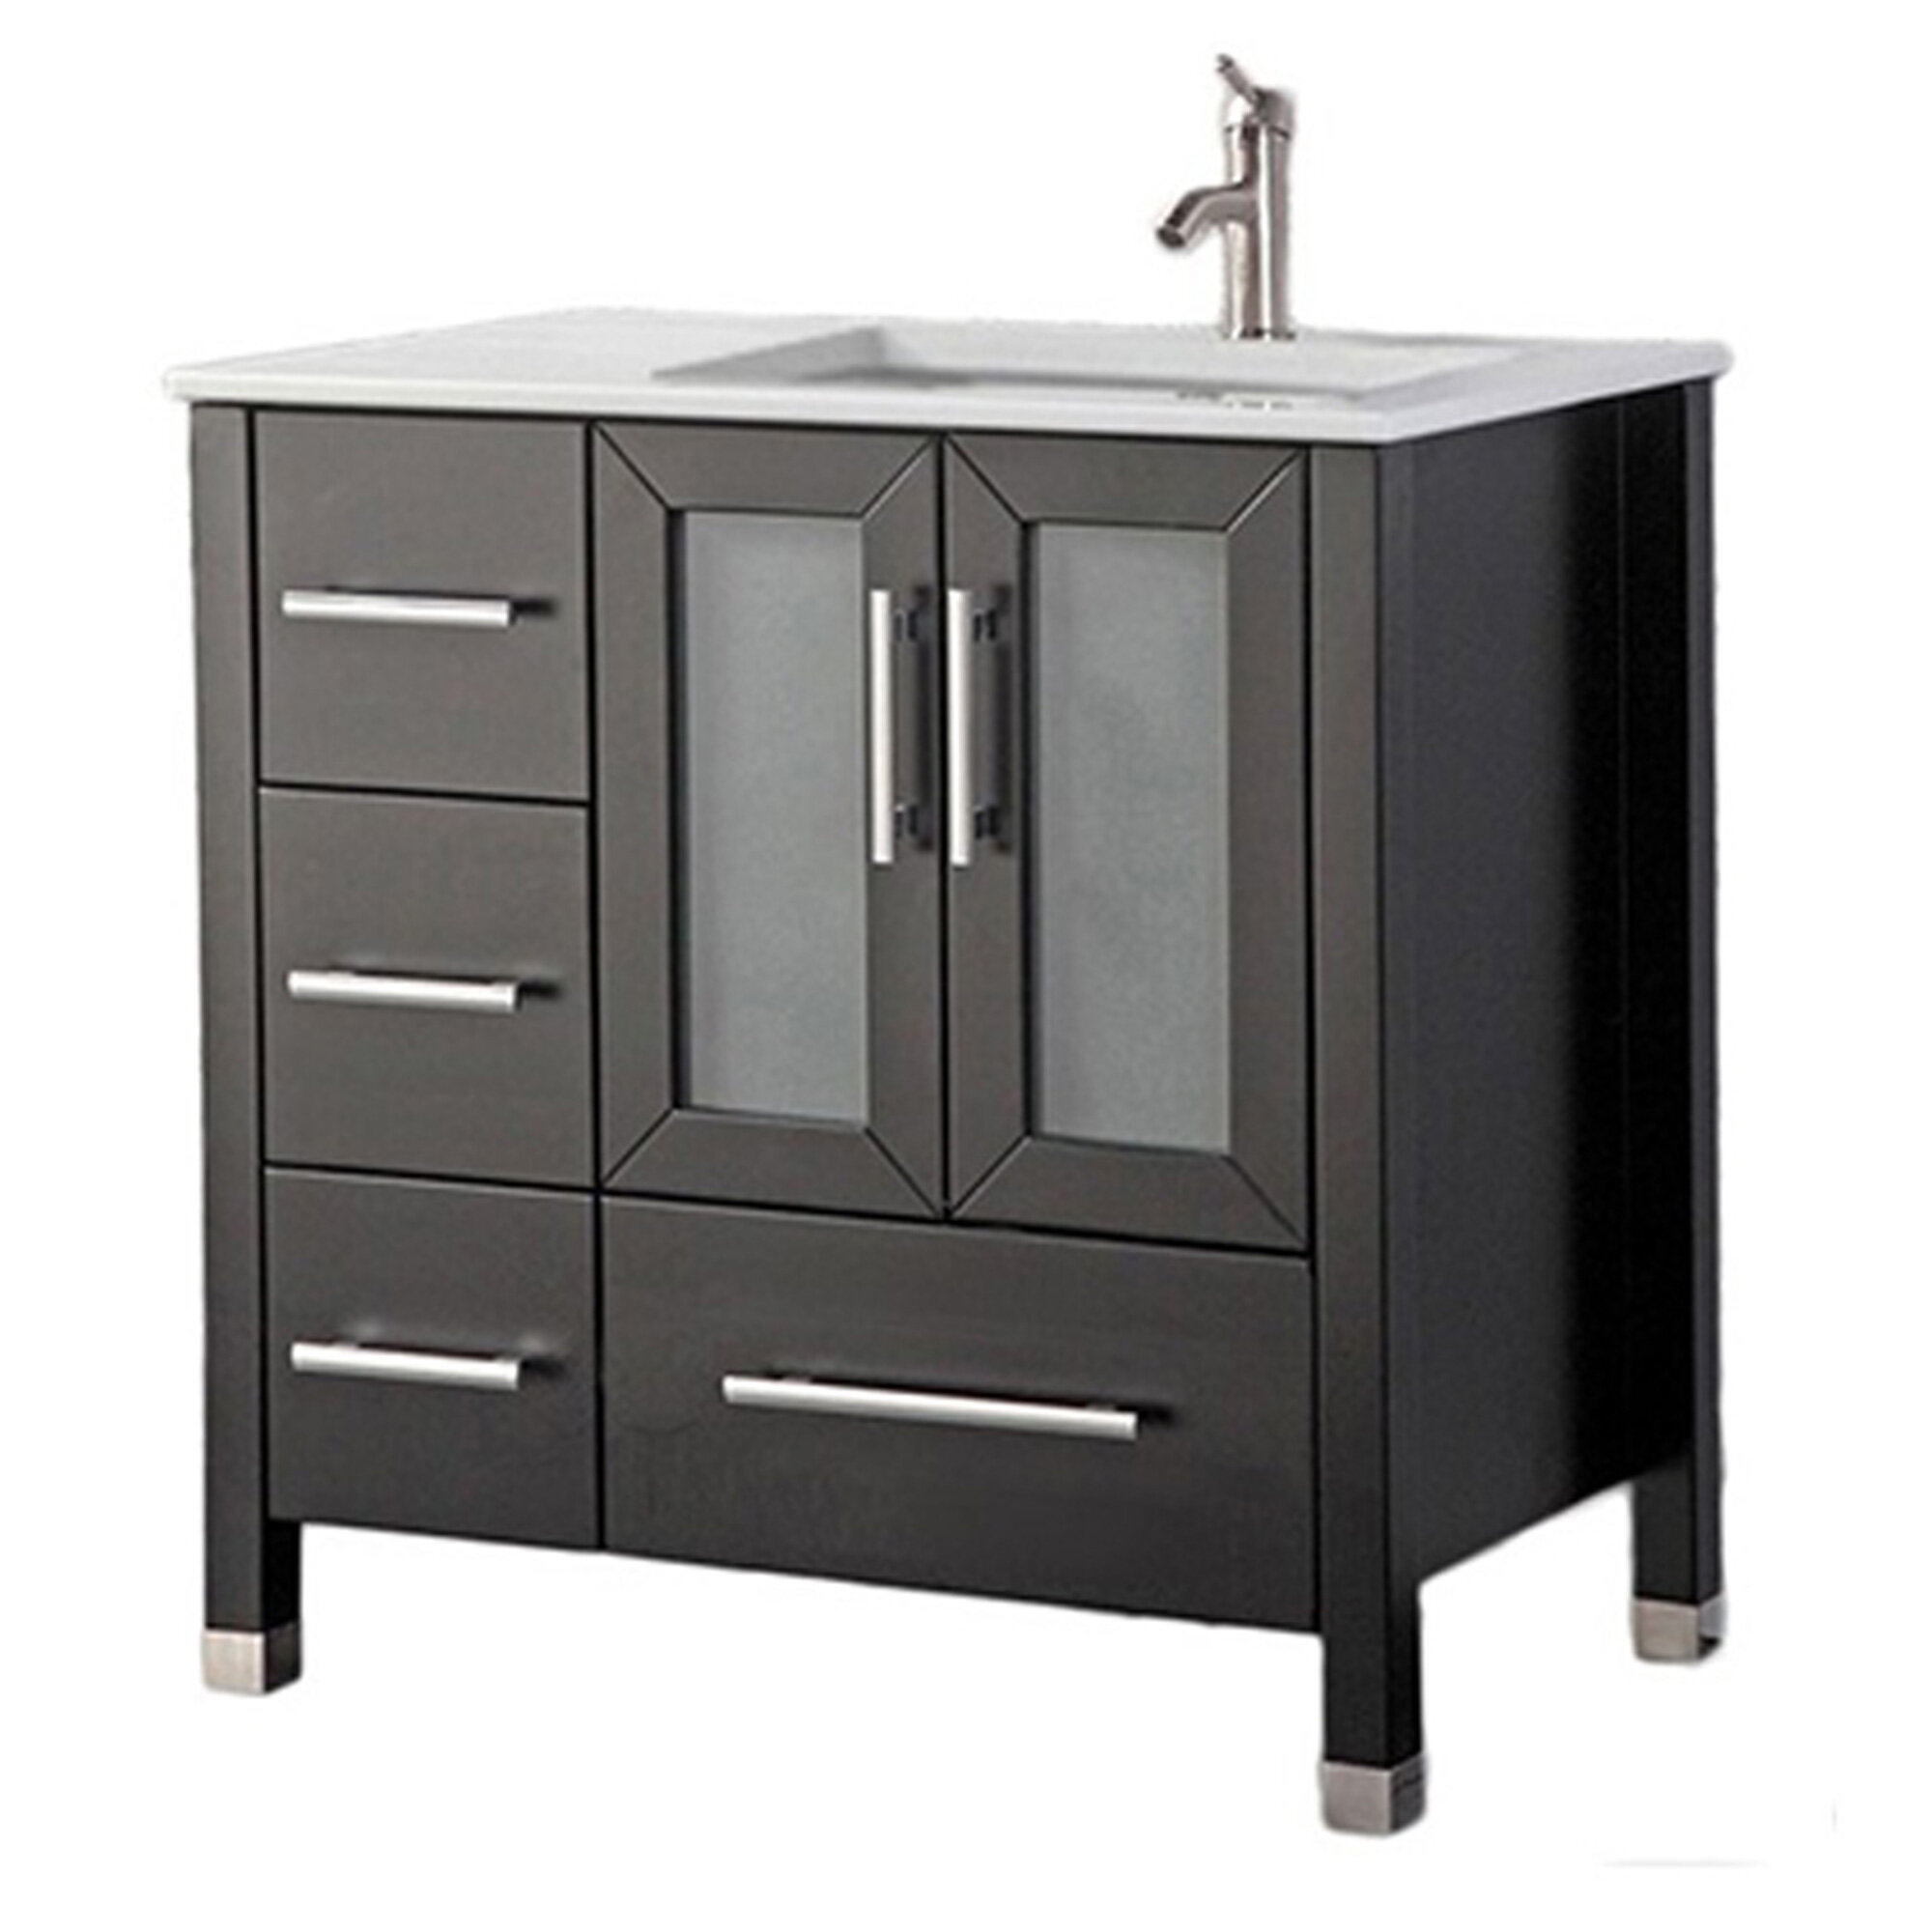 Right Offset Bathroom Vanity Visualhunt, Bath Vanity With Sink On Right